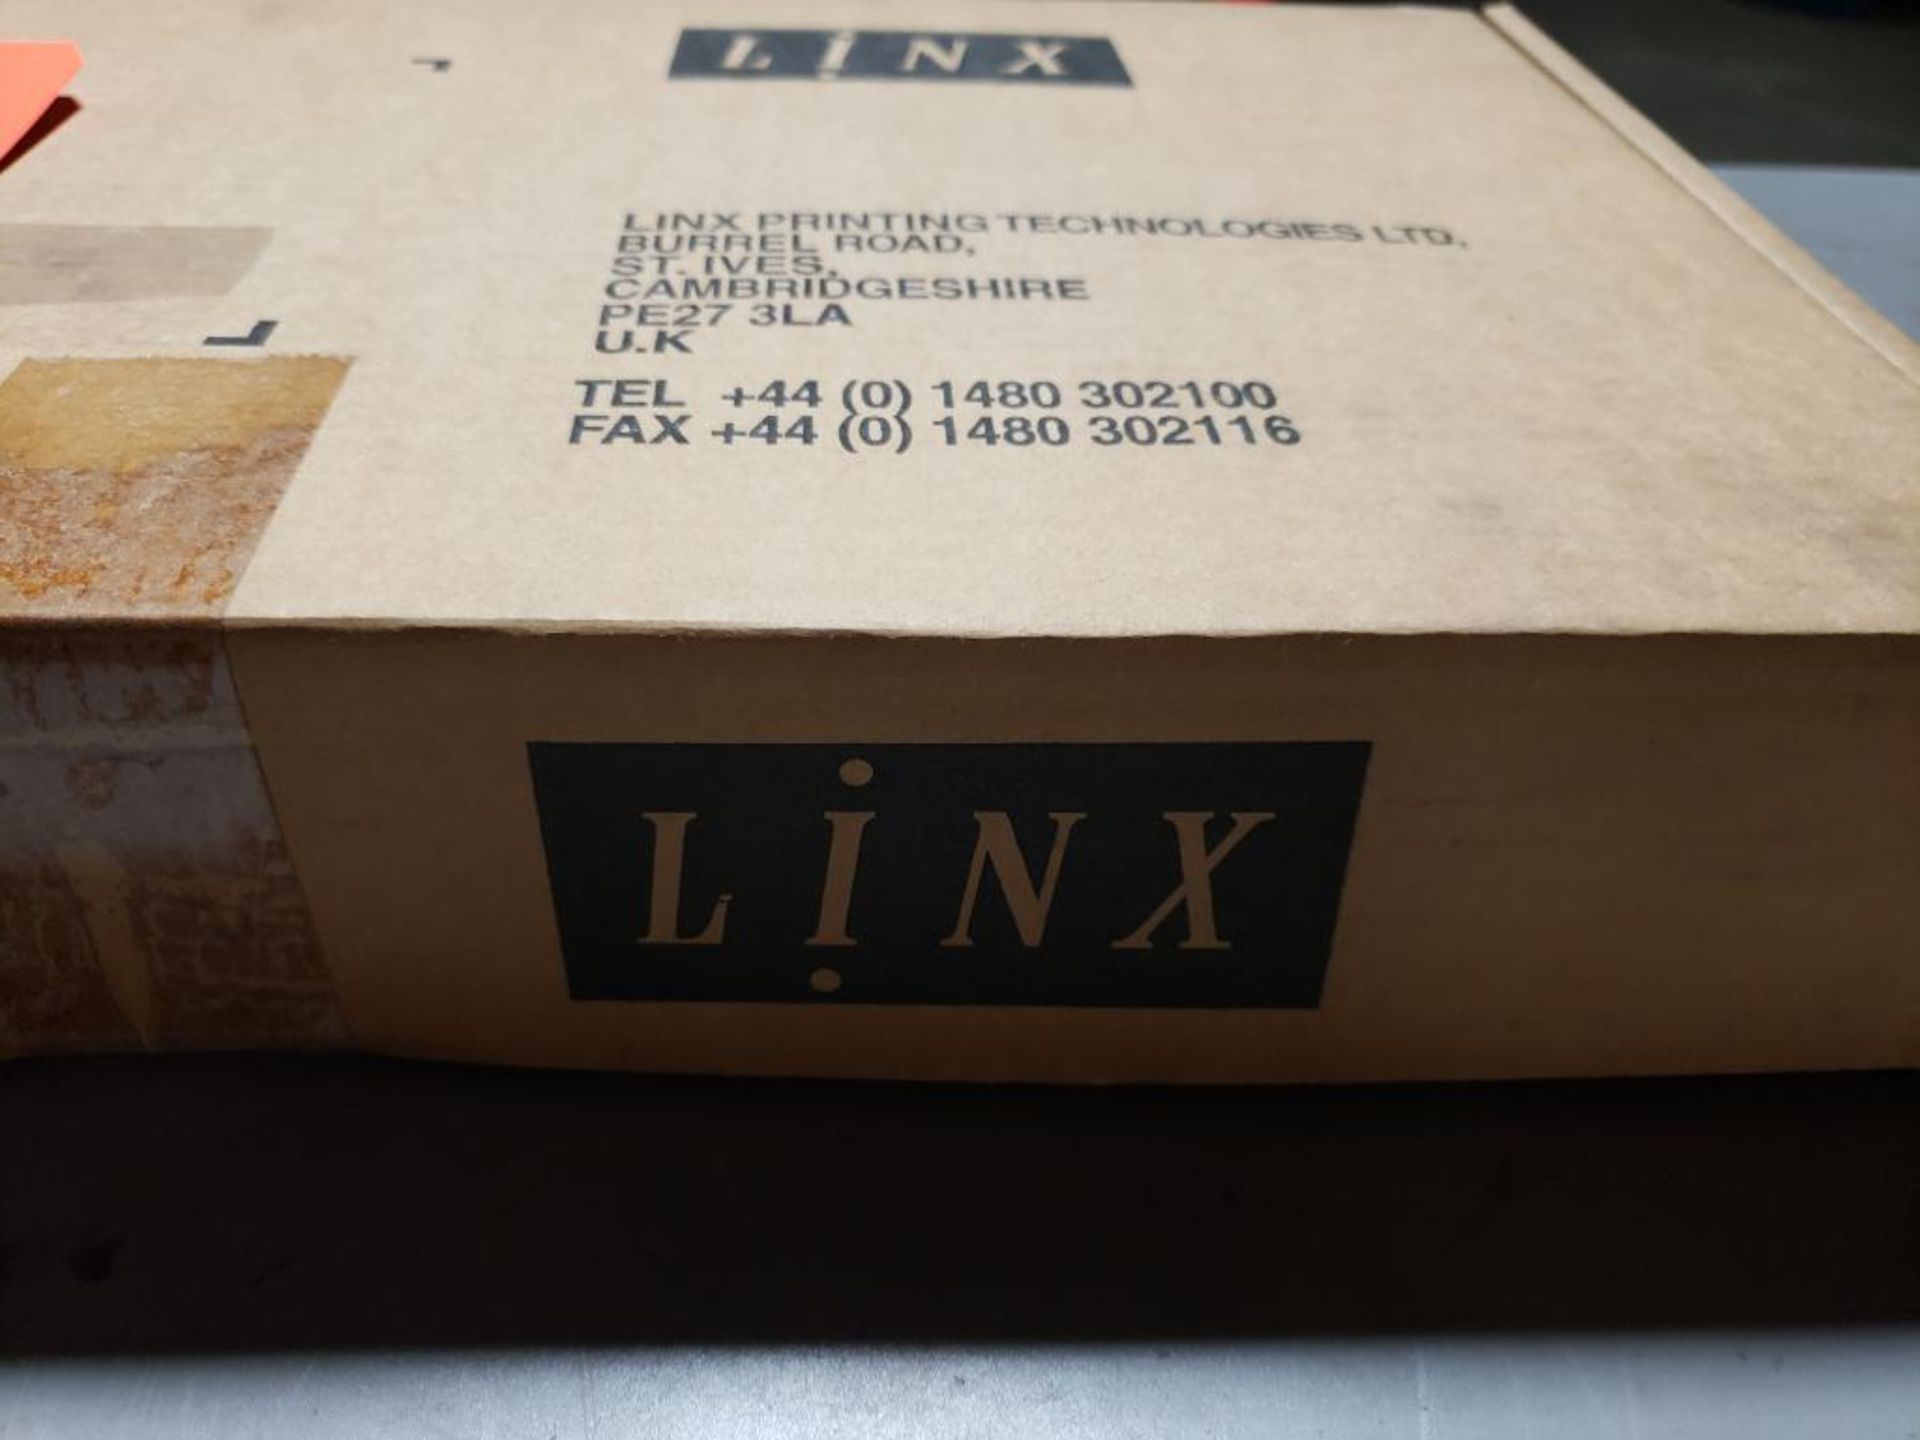 Linx amplifier PCB assembly. Model 6000 TUV. New in box. - Image 2 of 4